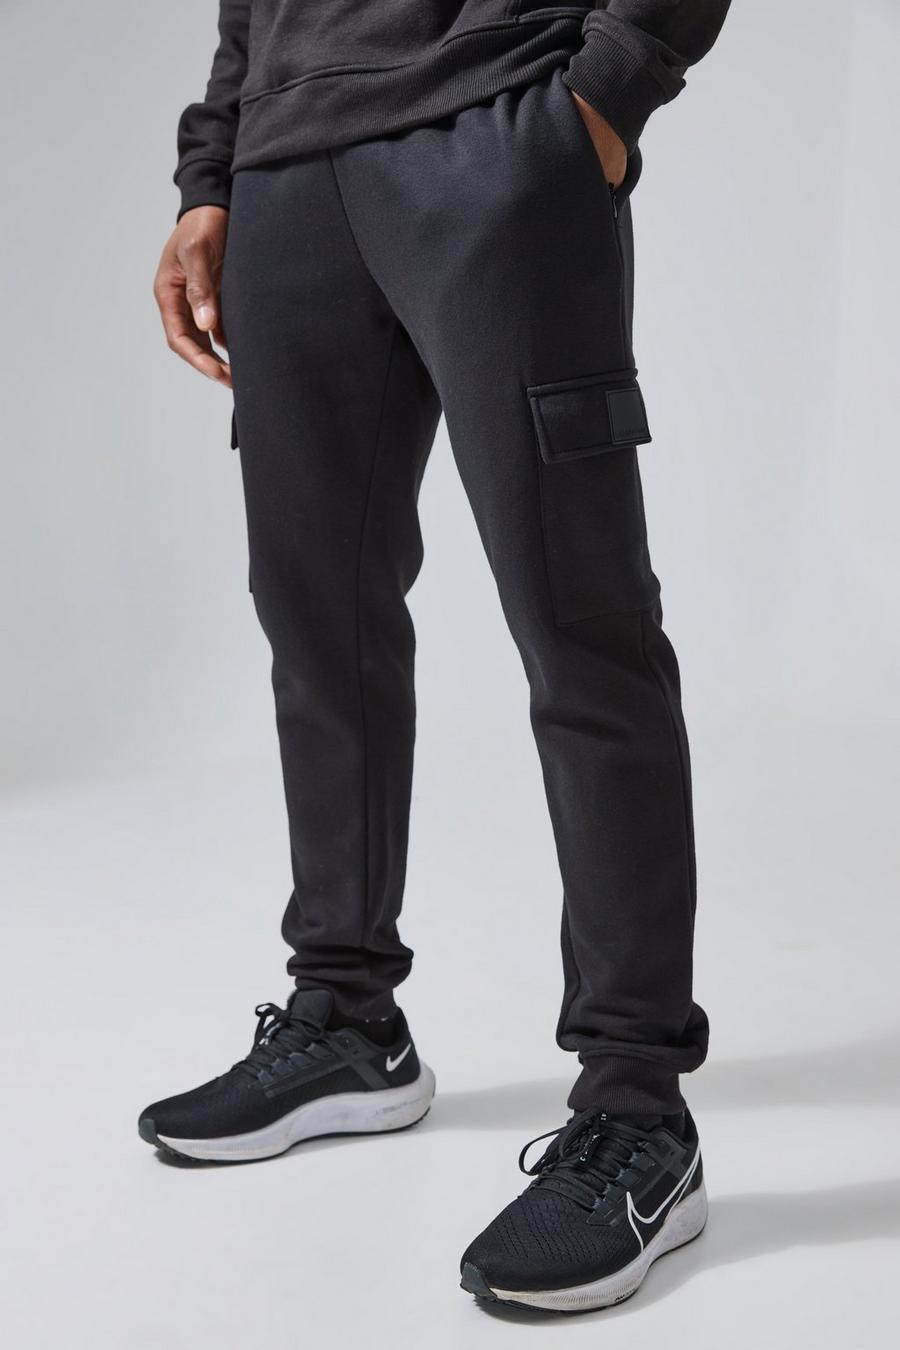 Buy Black Jersey Joggers 2 Pack from the Next UK online shop